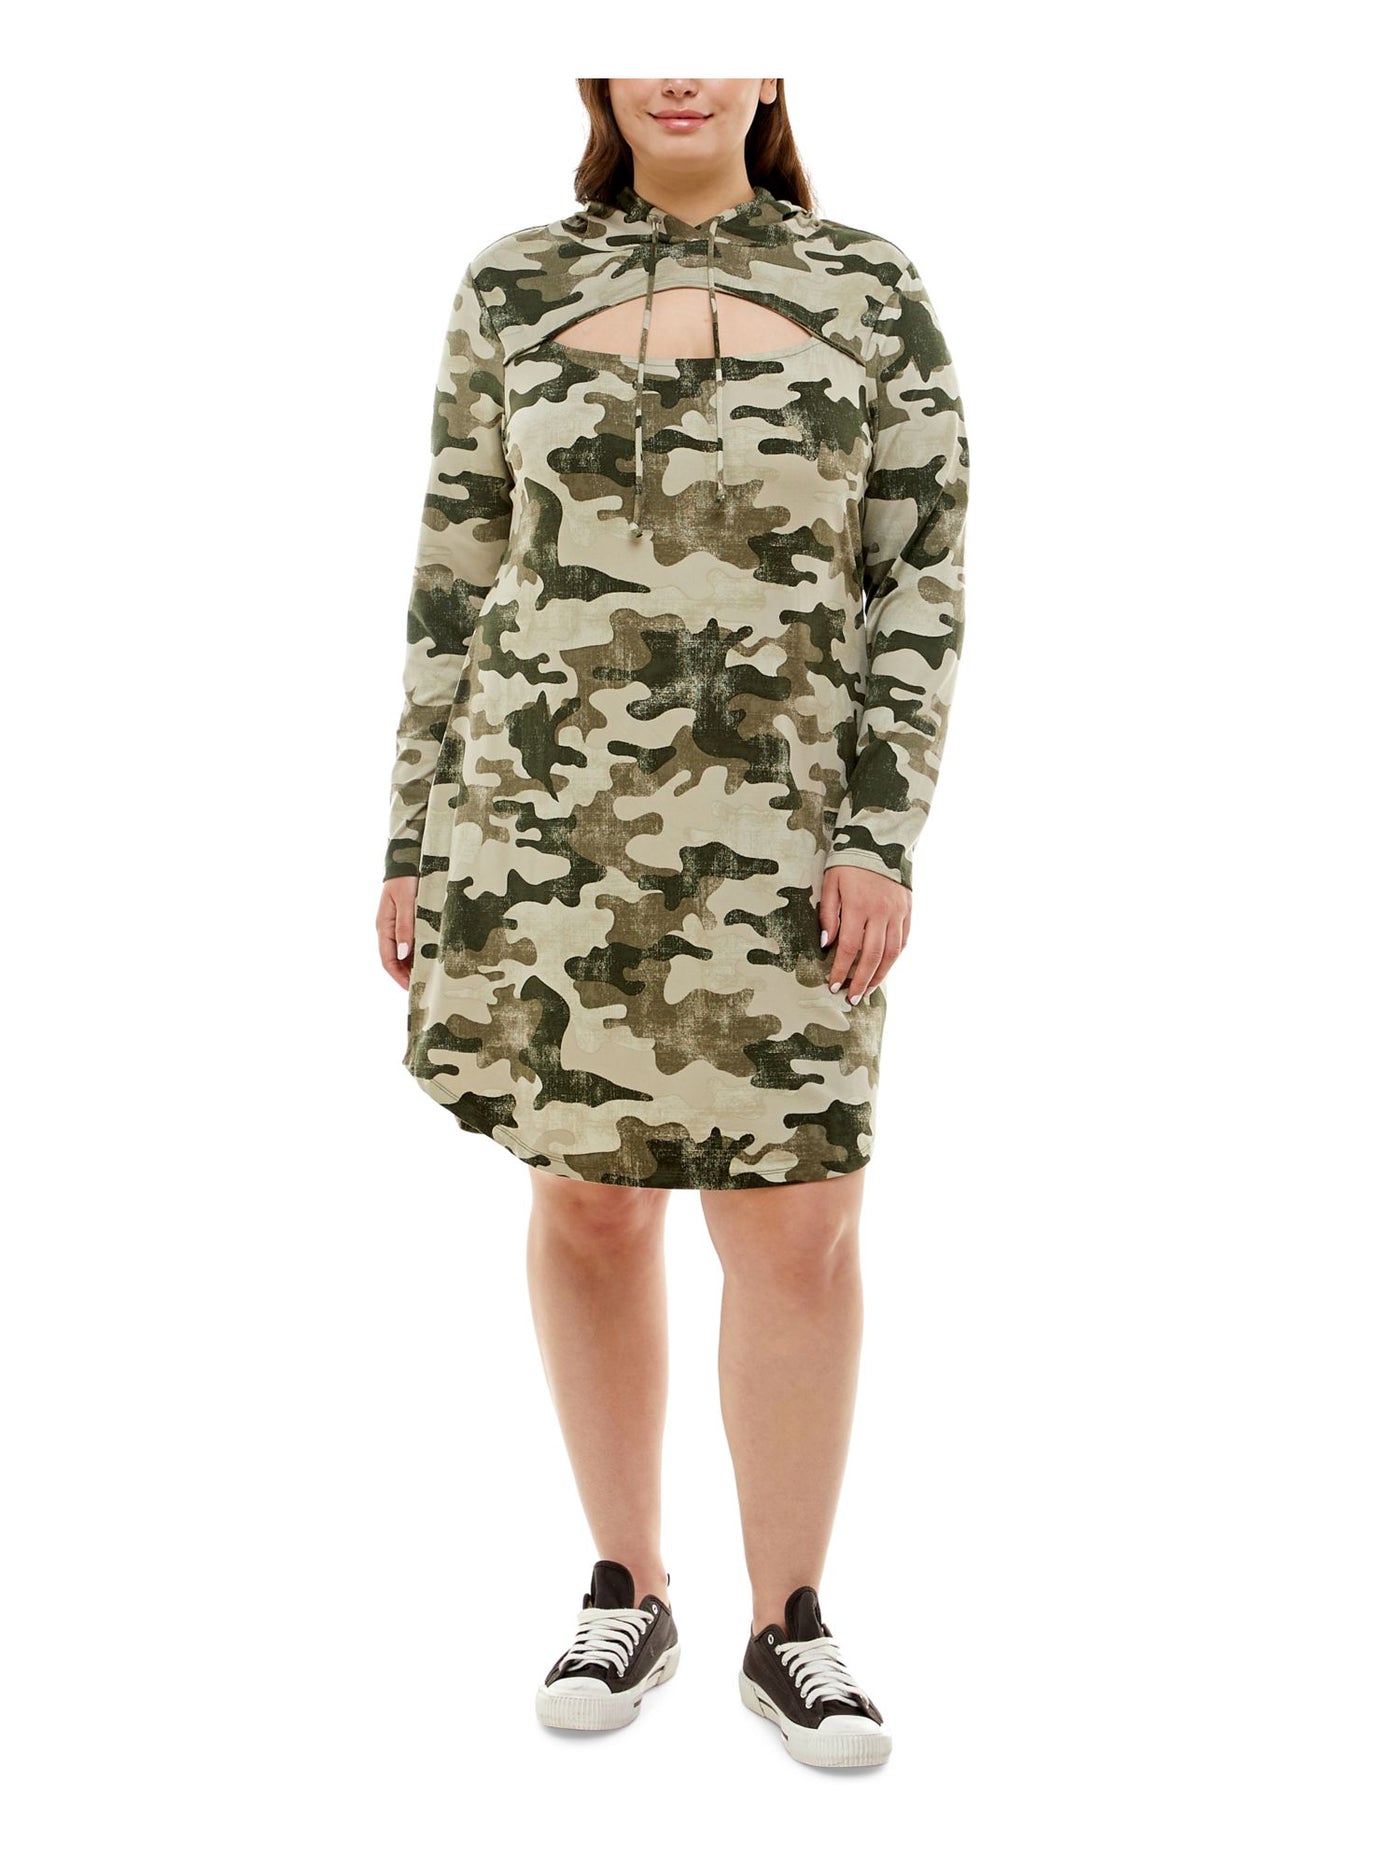 ALMOST FAMOUS Womens Green Cut Out Drawstring Hood Sweater Camouflage Long Sleeve Above The Knee Dress Plus 3X